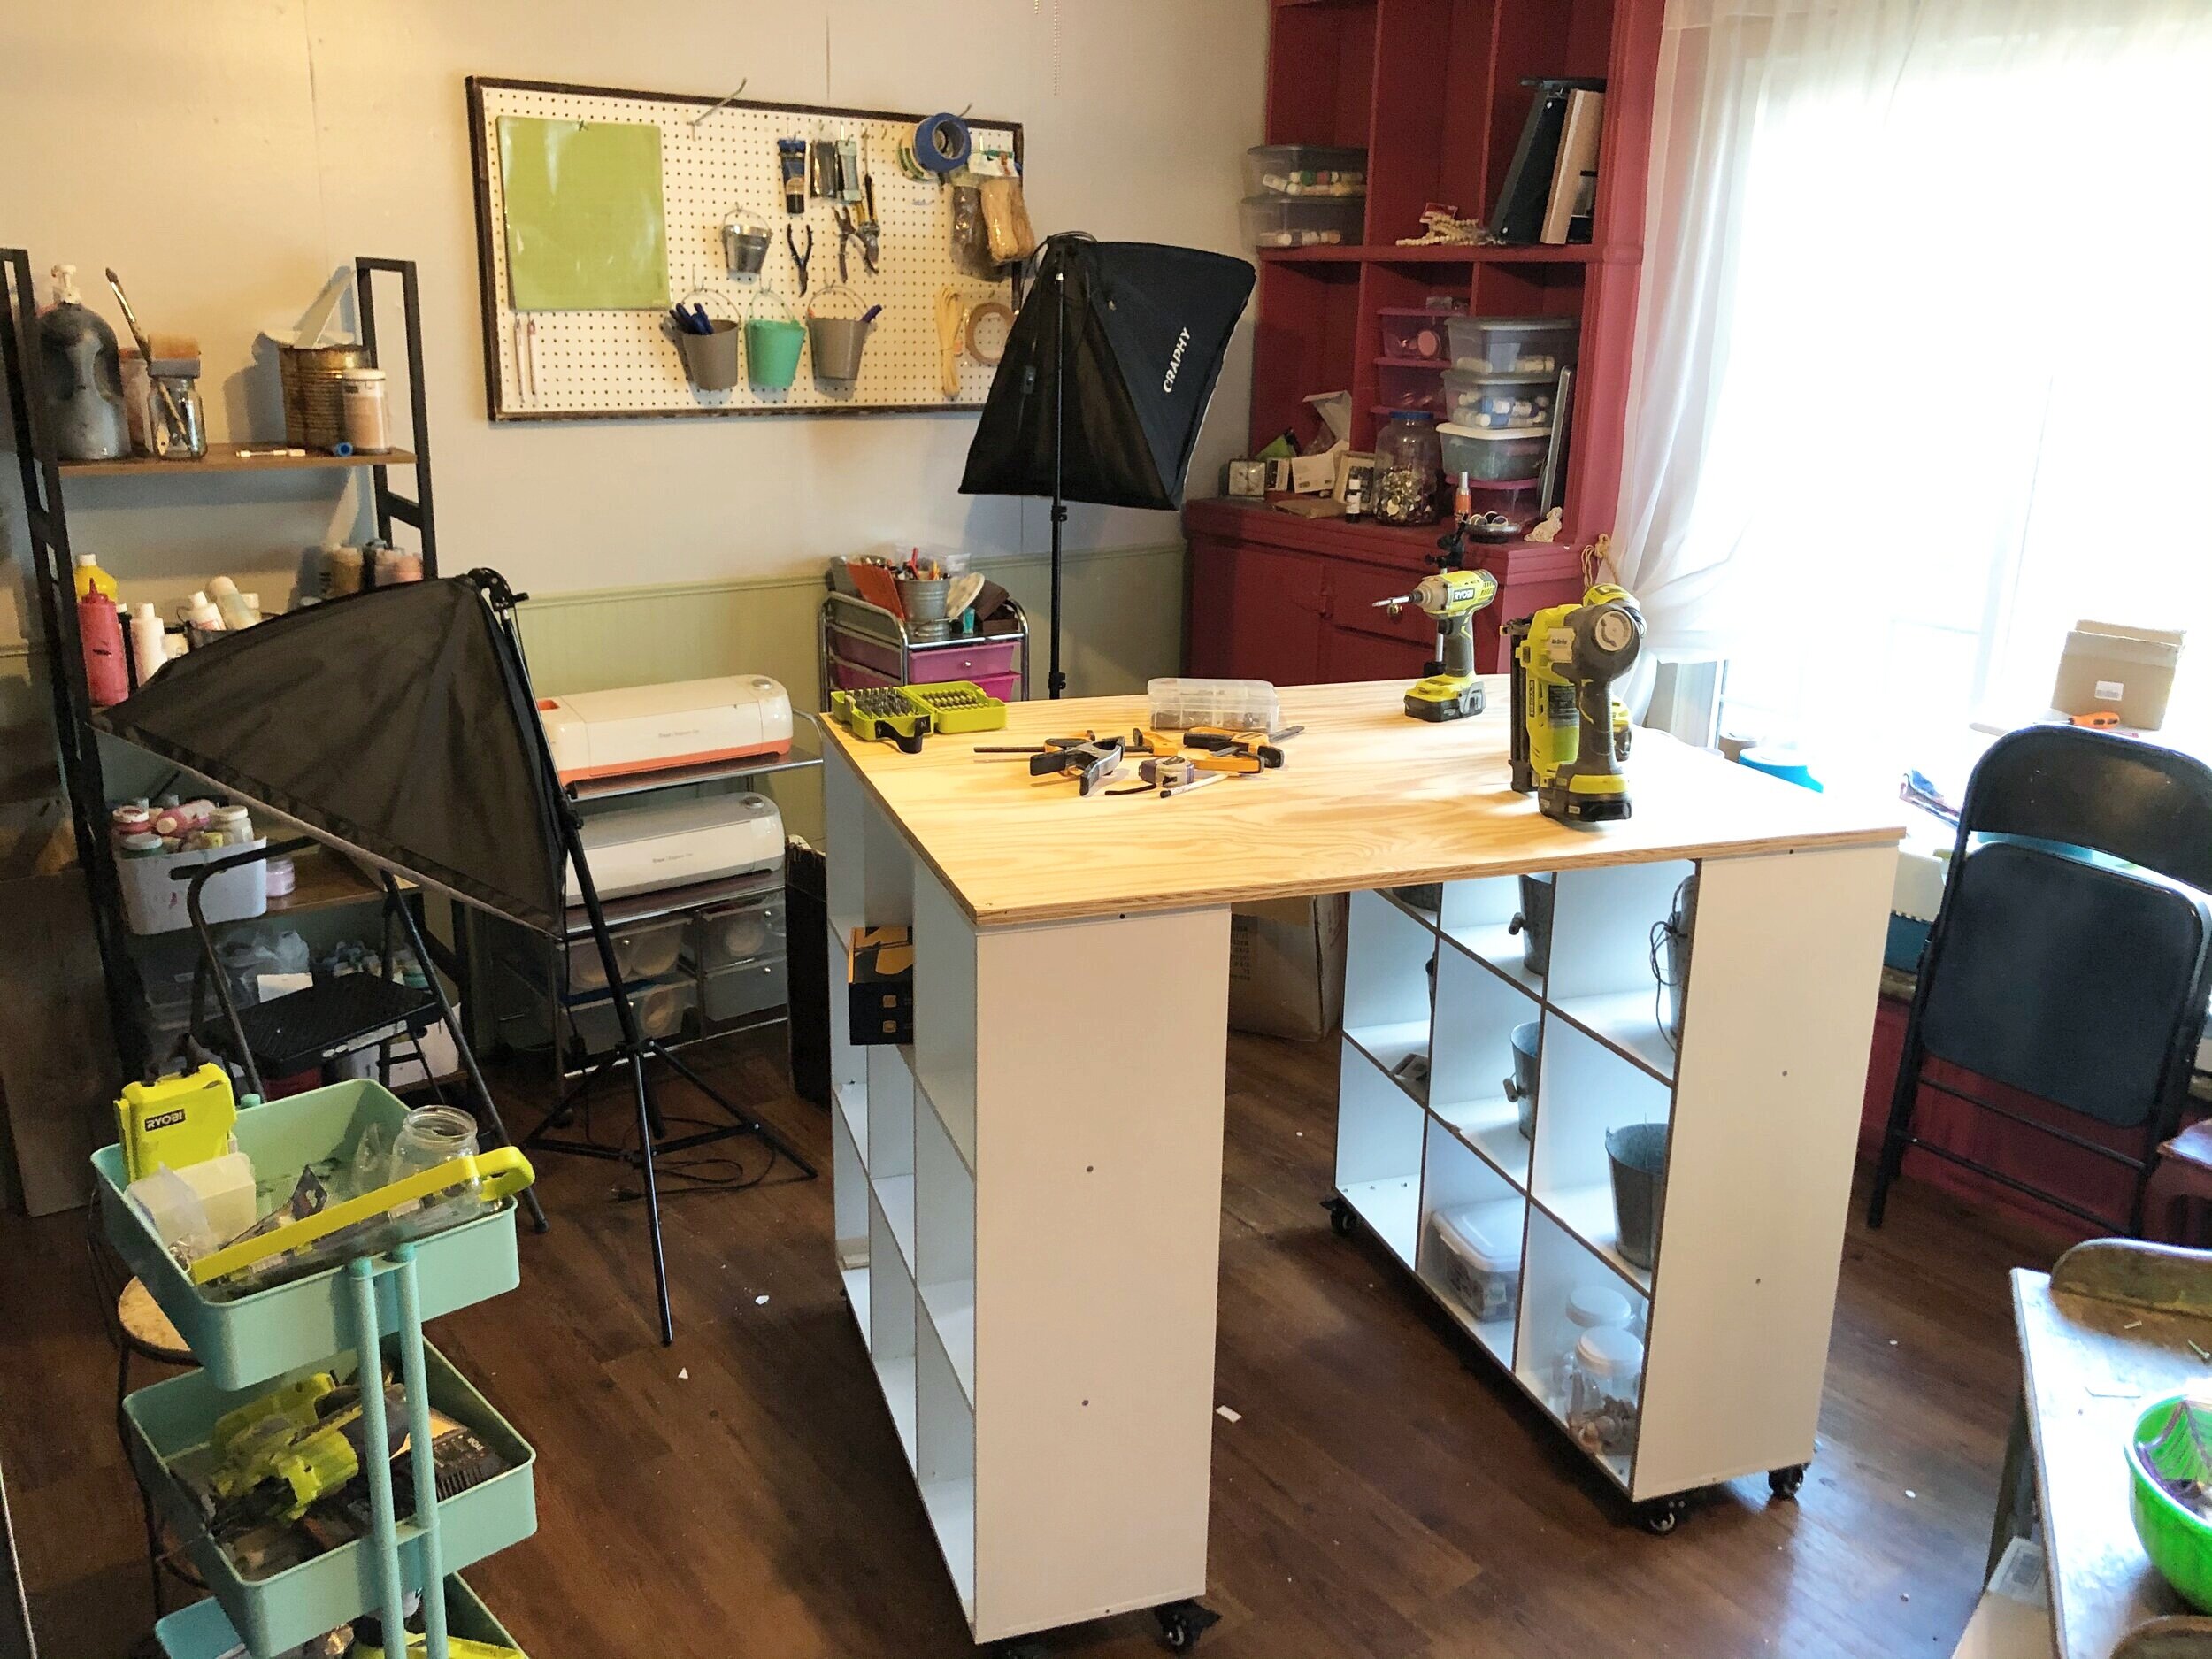 How to make a rolling craft desk on a budget. DIY Amazon 9 cube organizer standing tall craft desk. Non ikea craft desk craft.